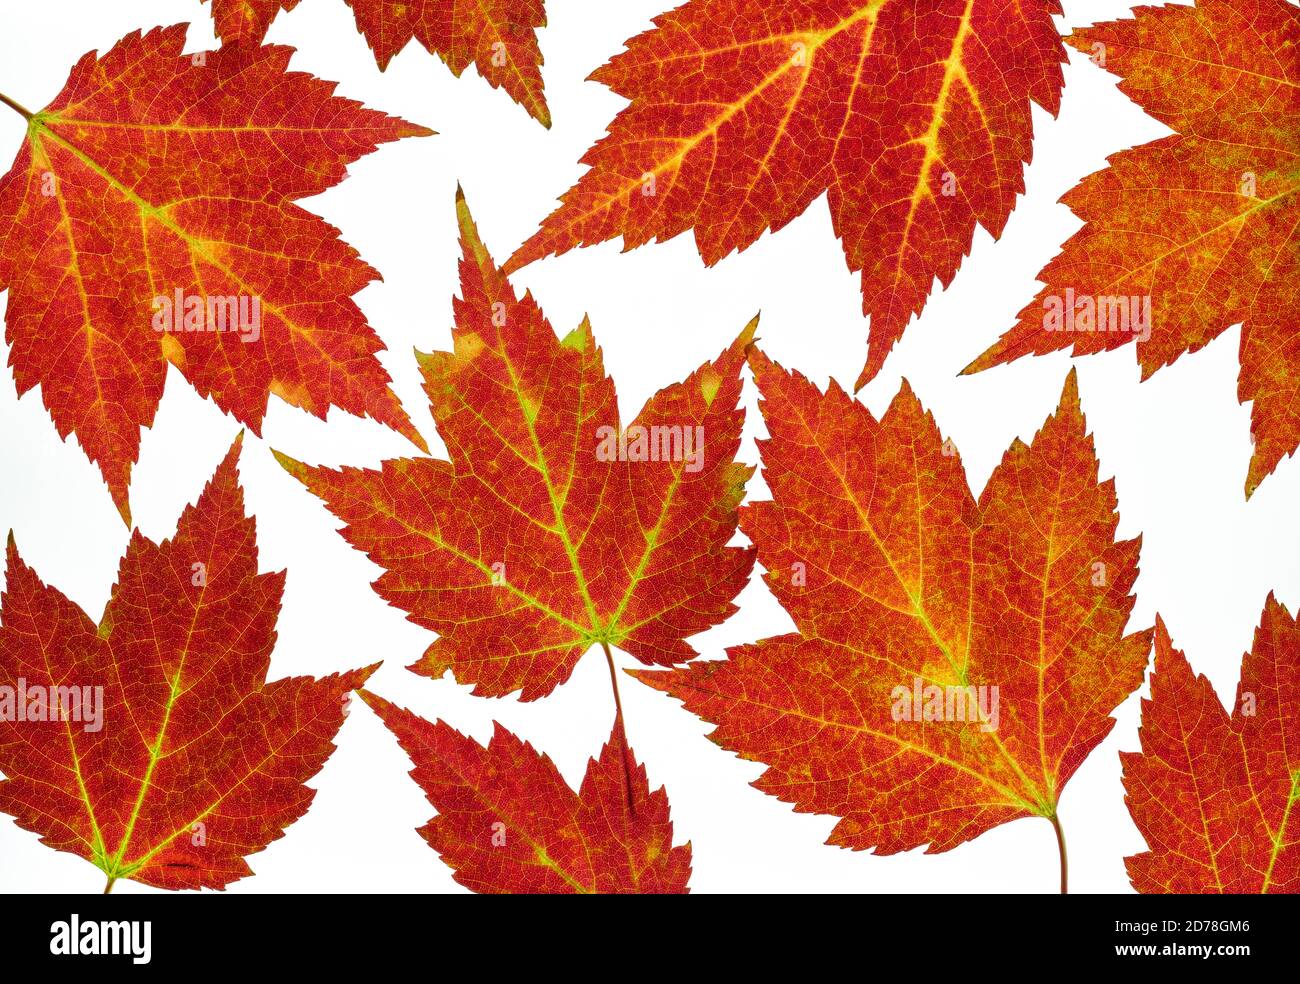 Red maple leaves showing fall coloration. Stock Photo